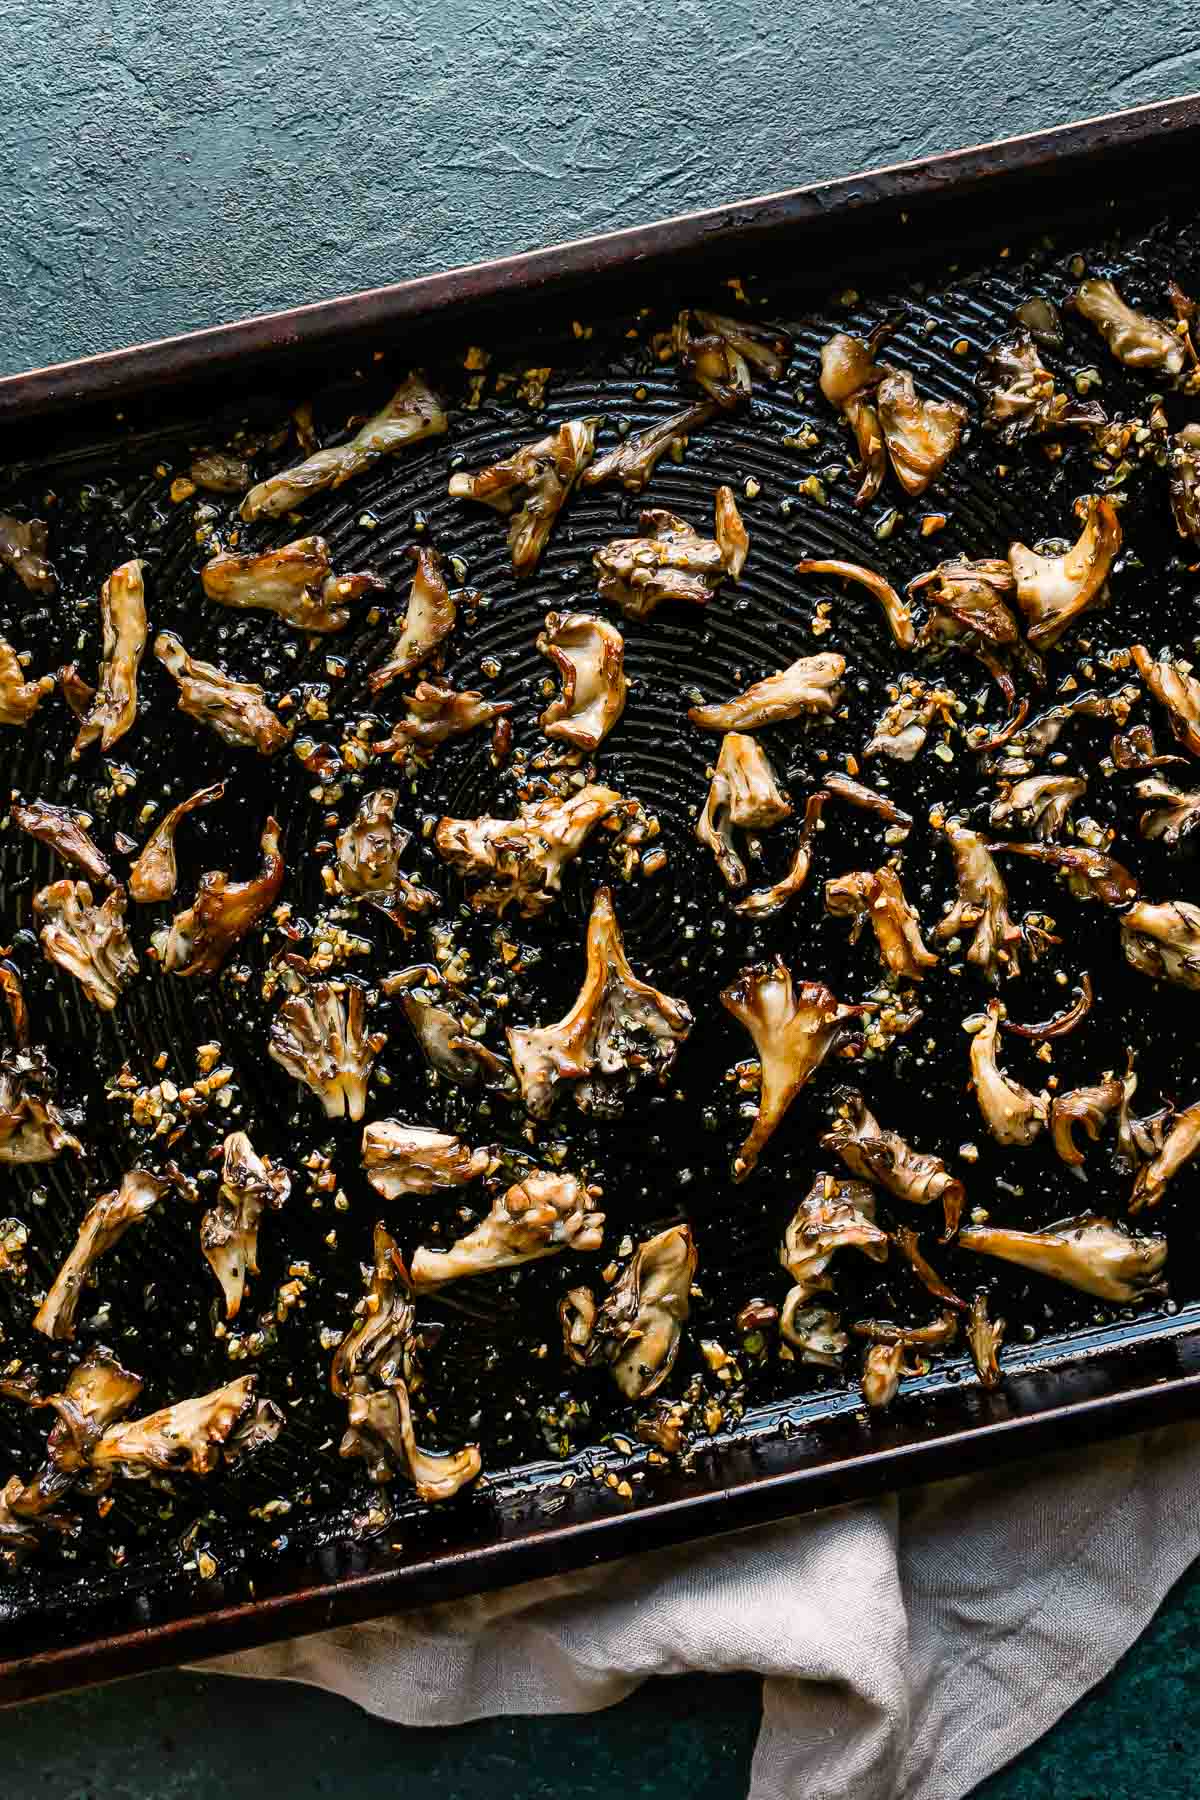 Oven roasted mushrooms are arranged in a single layer atop a metal baking sheet that sits atop a black textured surface. The mushrooms have been tossed with garlic and fresh herbs and have become crispy. A light gray linen napkin rests underneath the baking sheet.